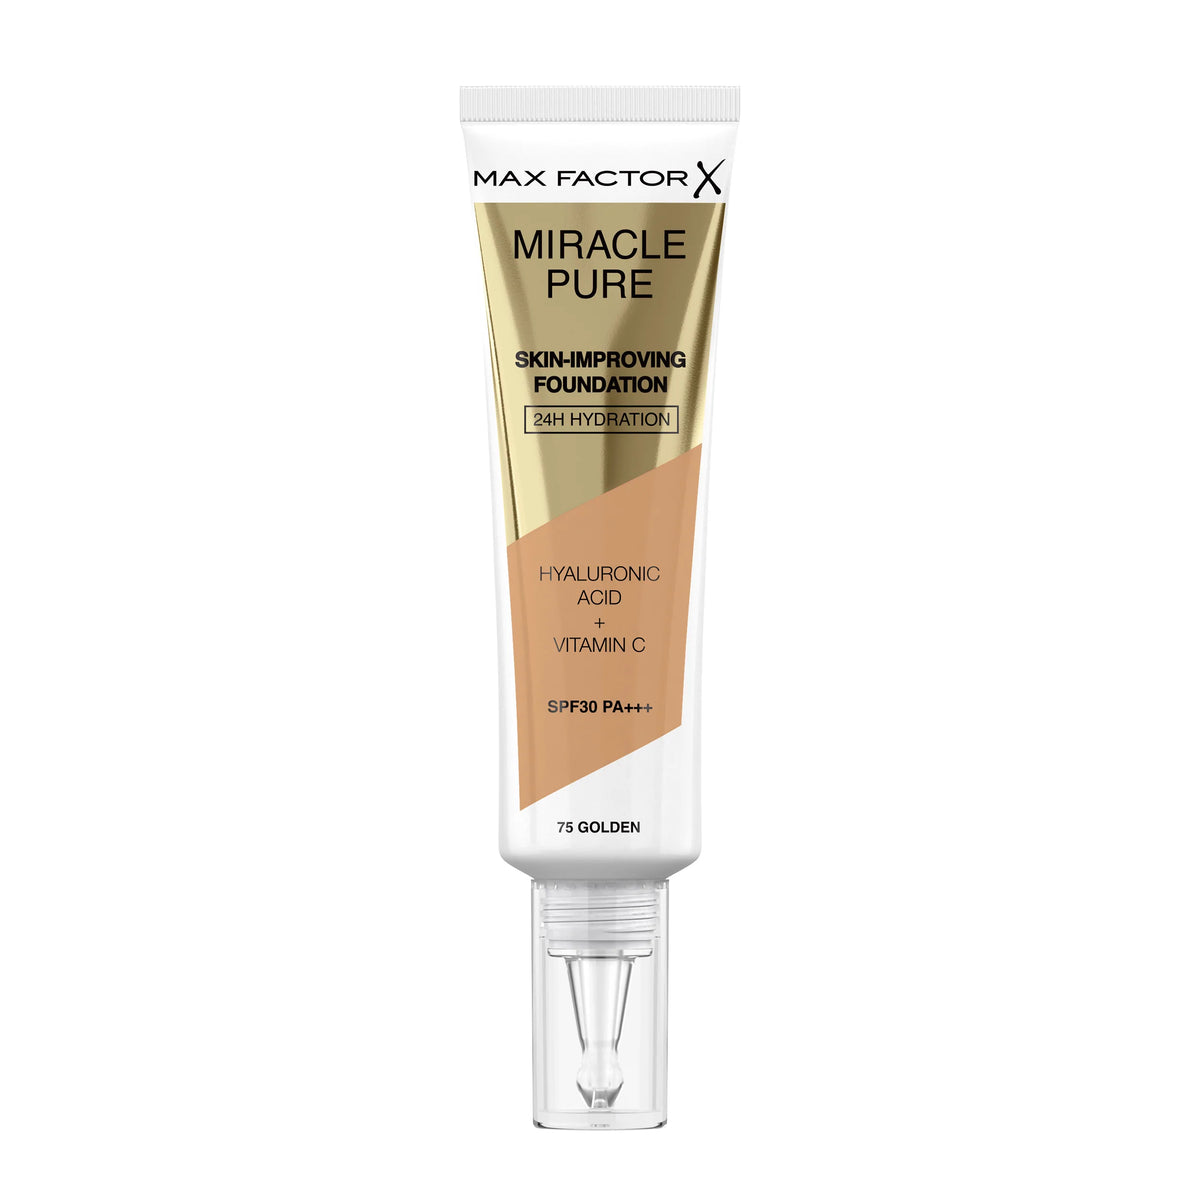 Maxfactor Miracle Pure Skin Improving Foundation 24H Hydration SPF 30 75 Golden 30 ML